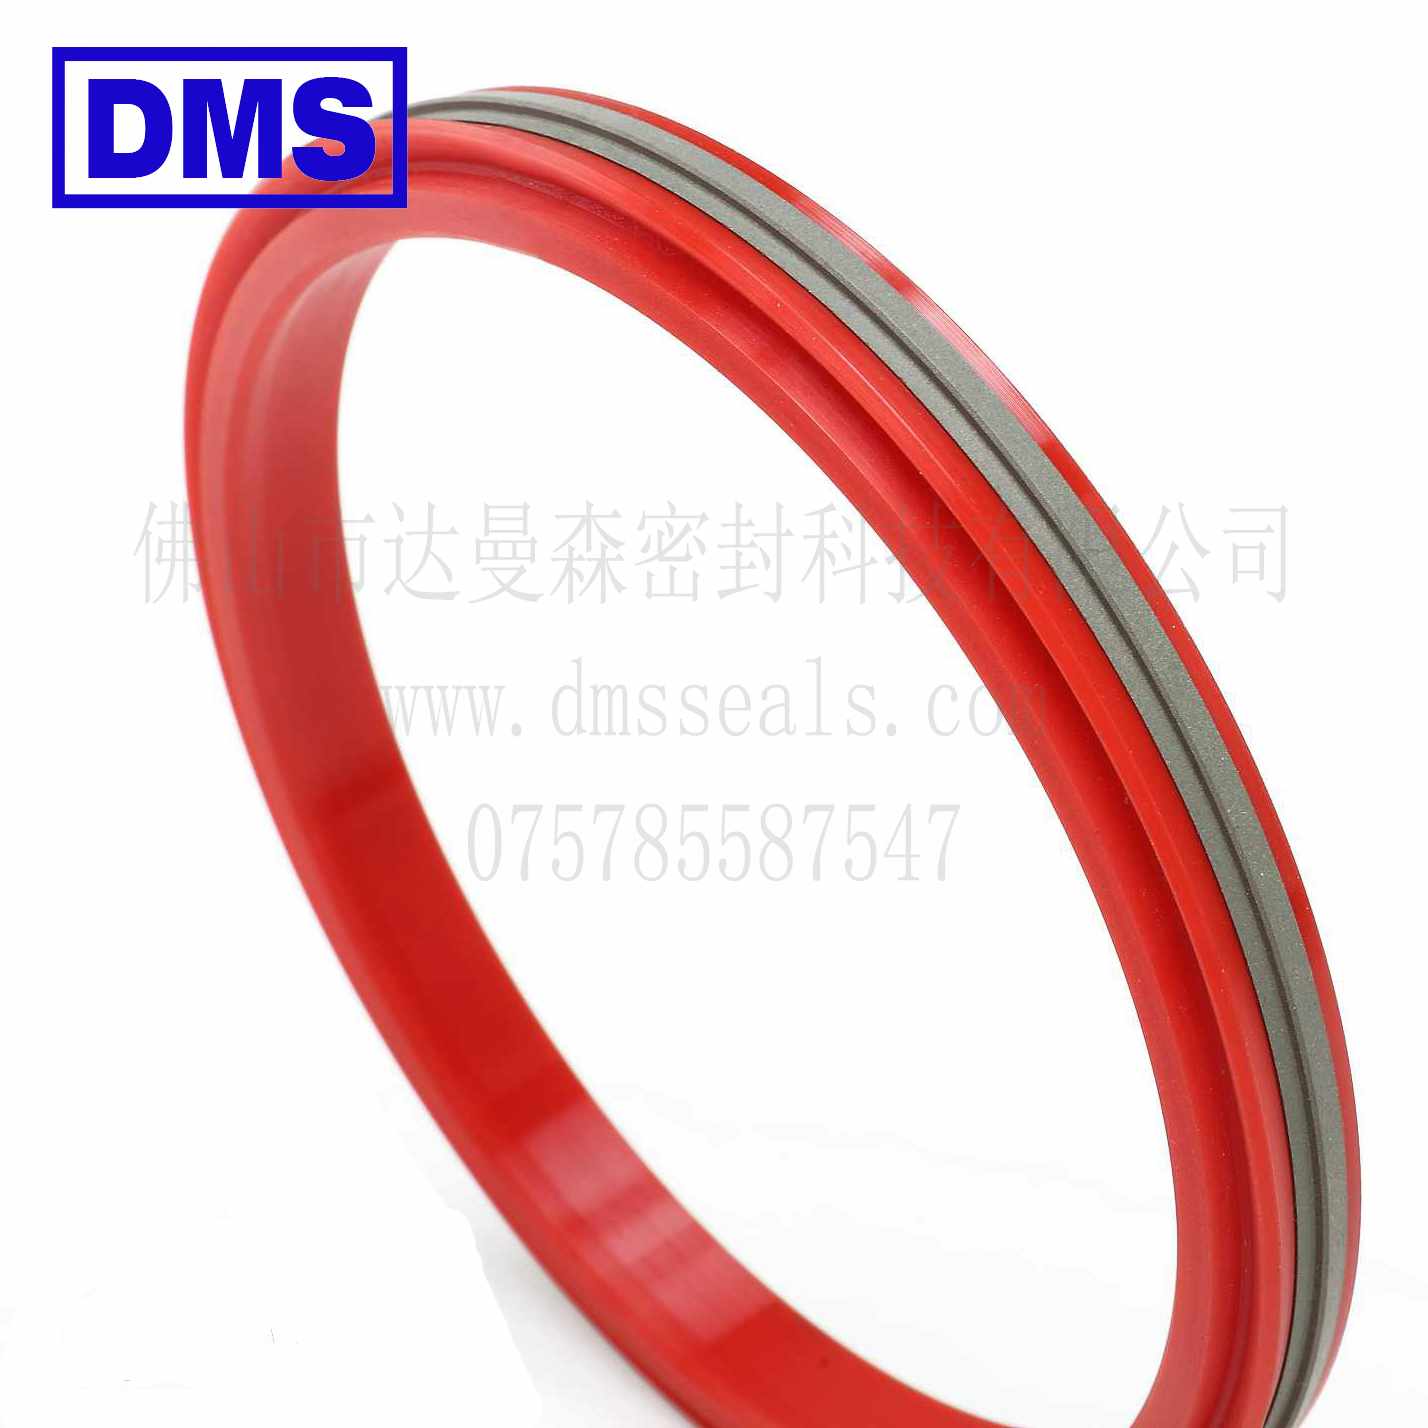 DMS Seal Manufacturer pneumatic piston seals with nbr or fkm o ring for light and medium hydraulic systems-4